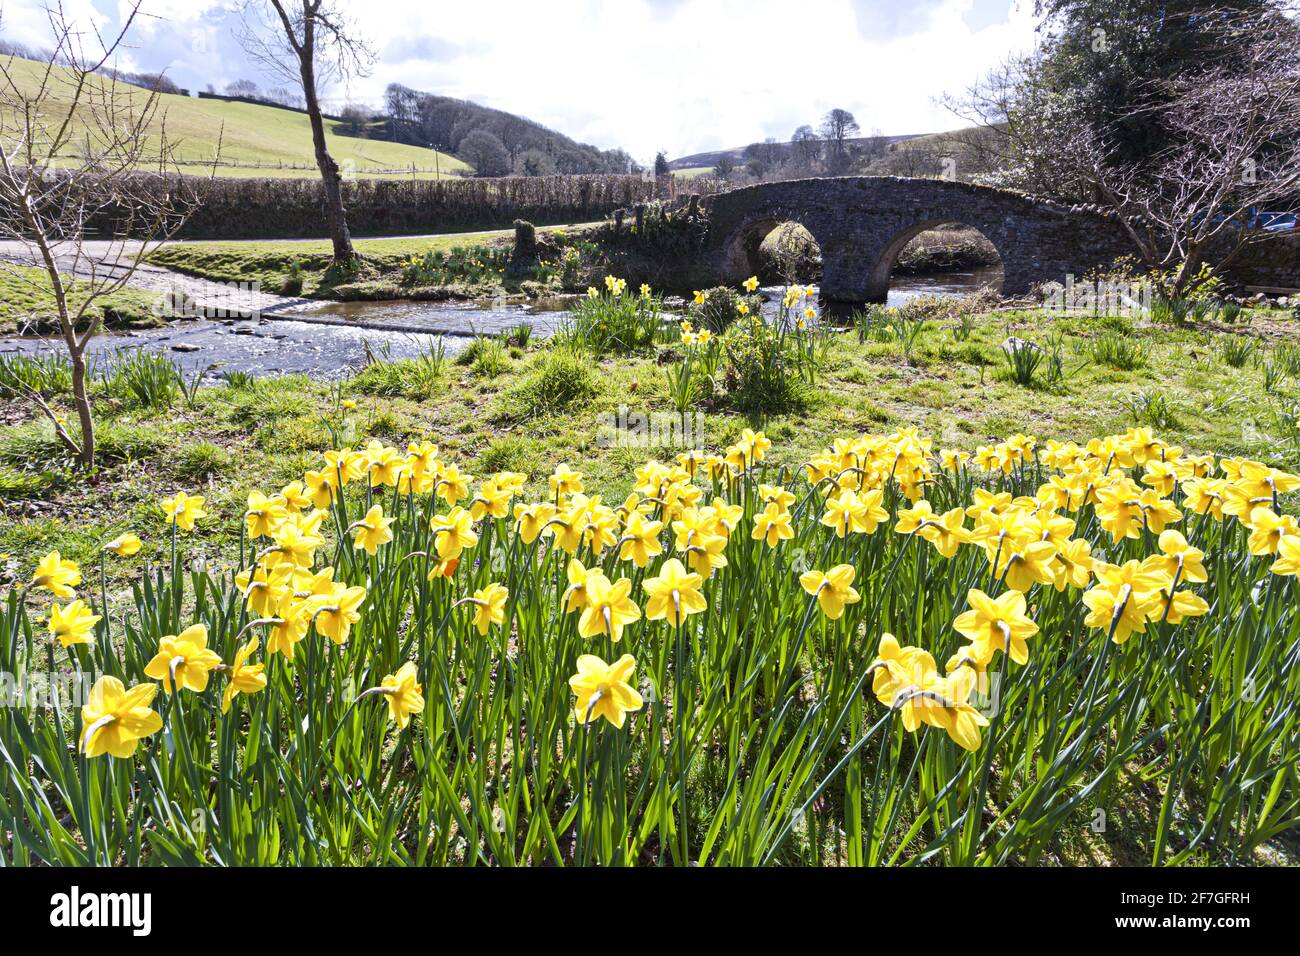 Springtime on Exmoor National Park - Daffodils beside the packhorse bridge over Badgworthy Water in the village of Malmsmead, Devon, UK Stock Photo